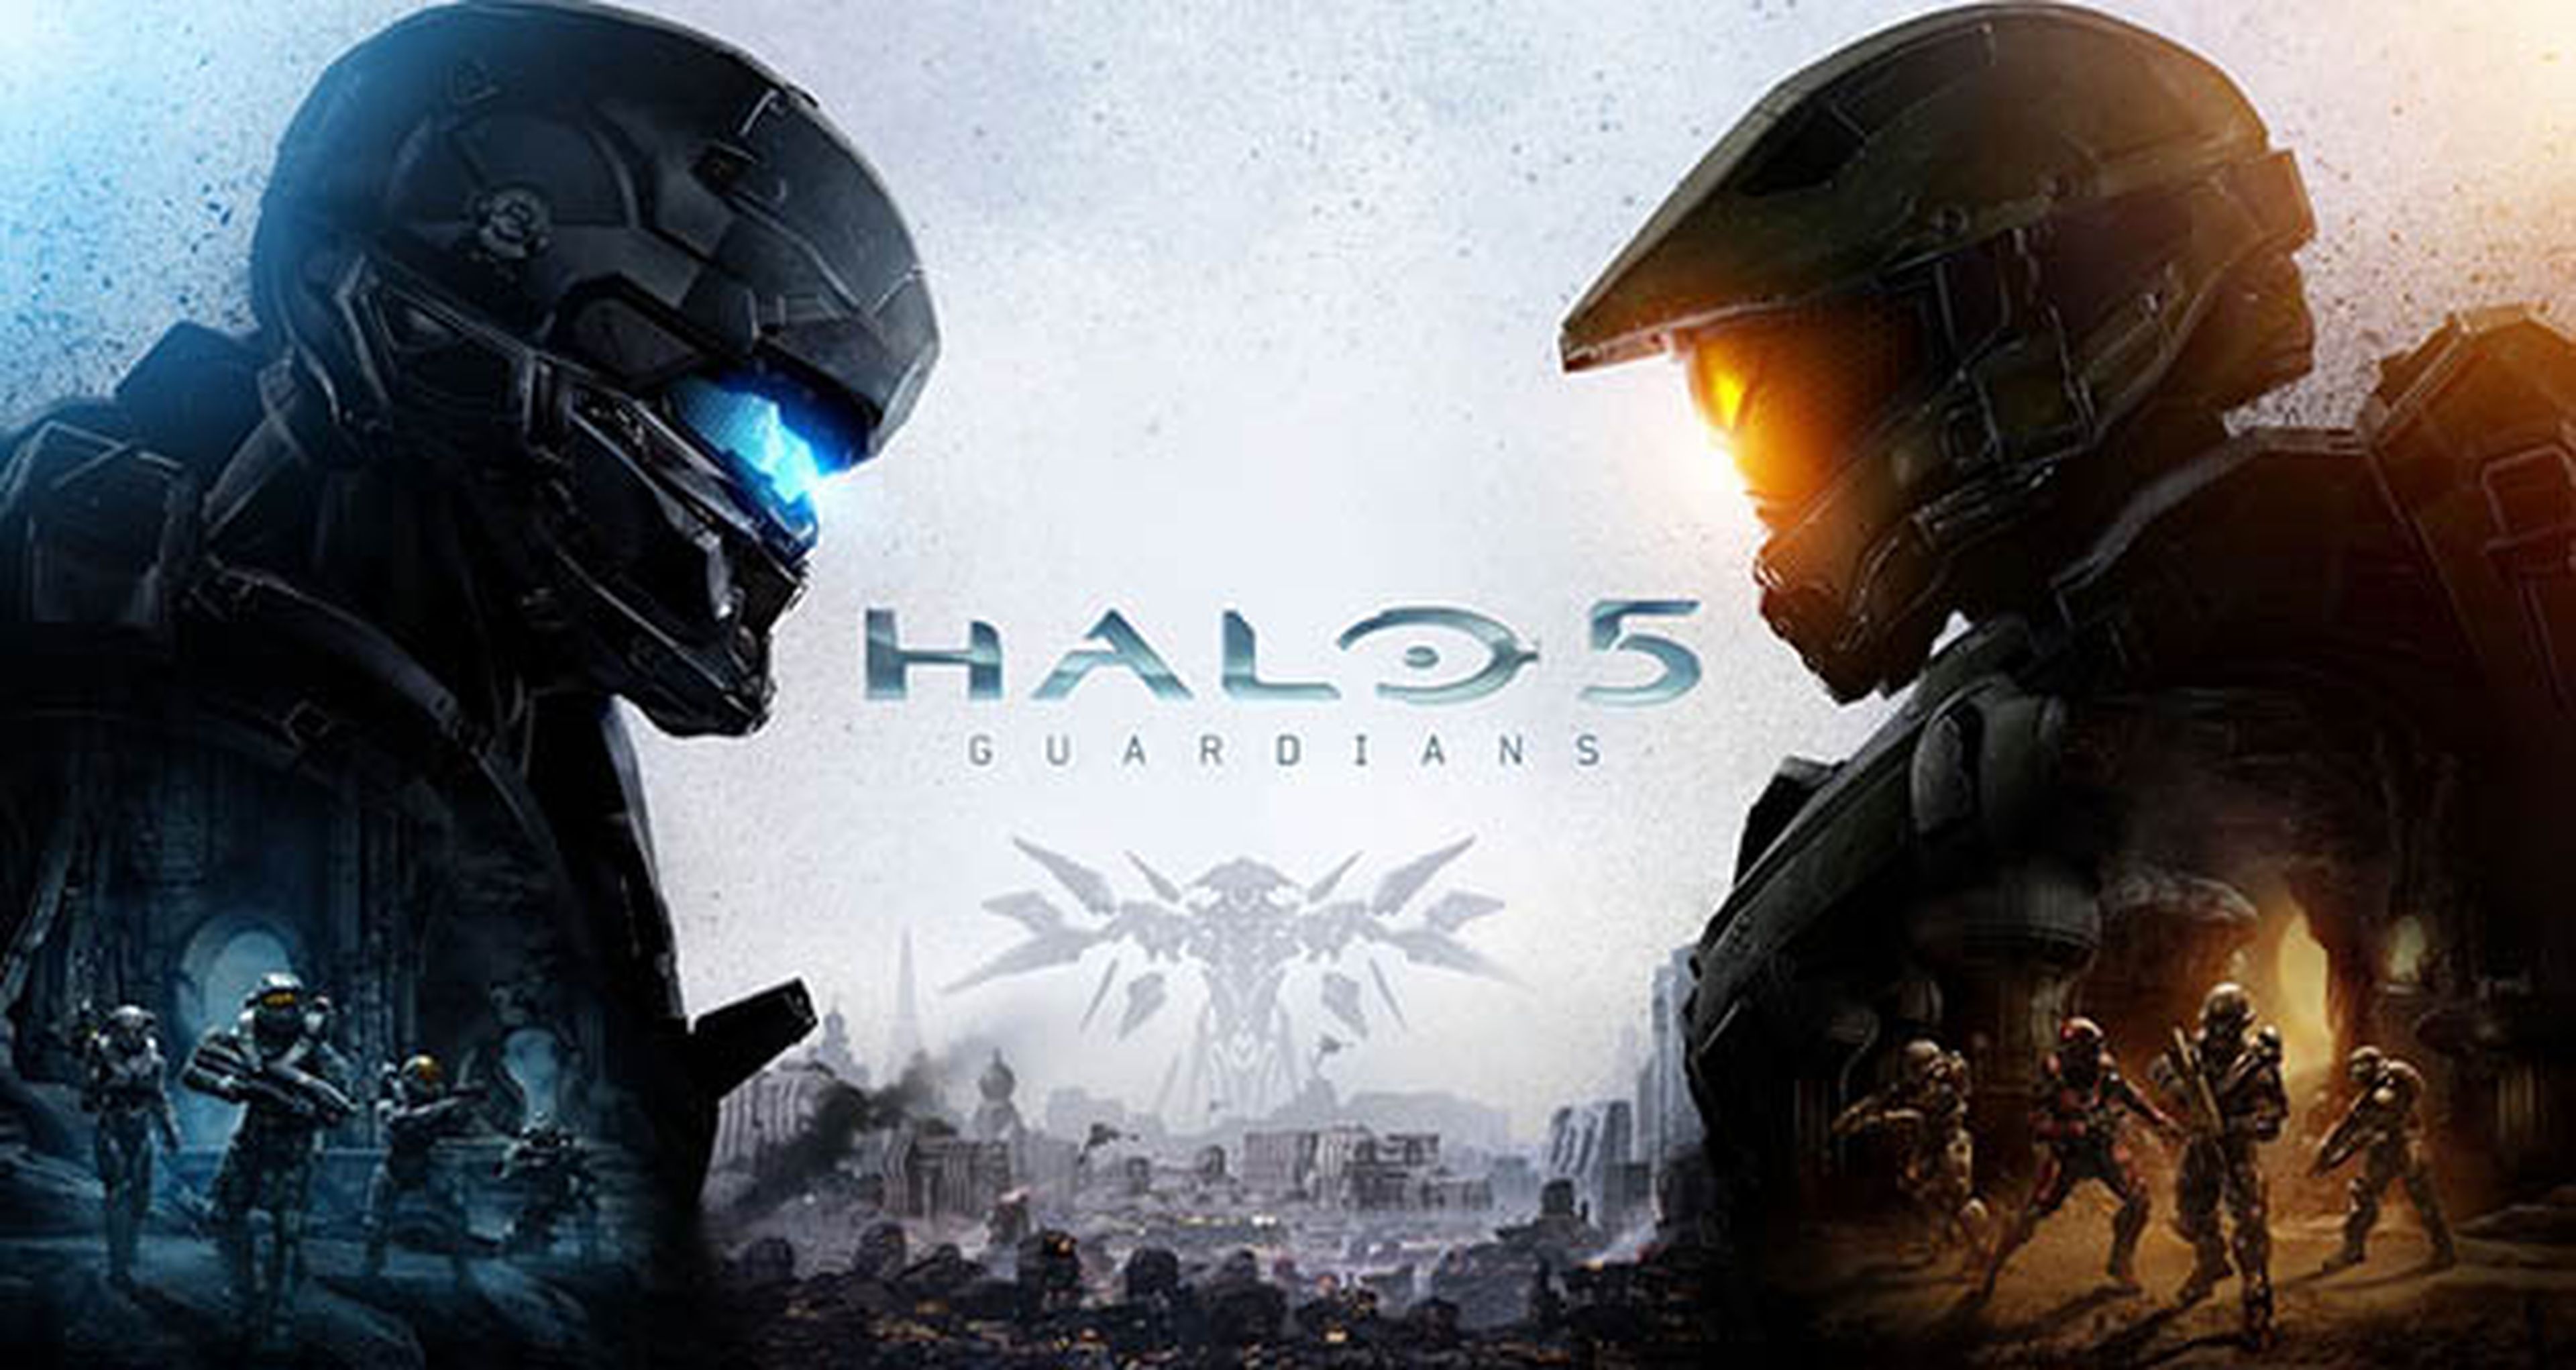 Ya puedes ver The Making of Halo 5: The Sprint